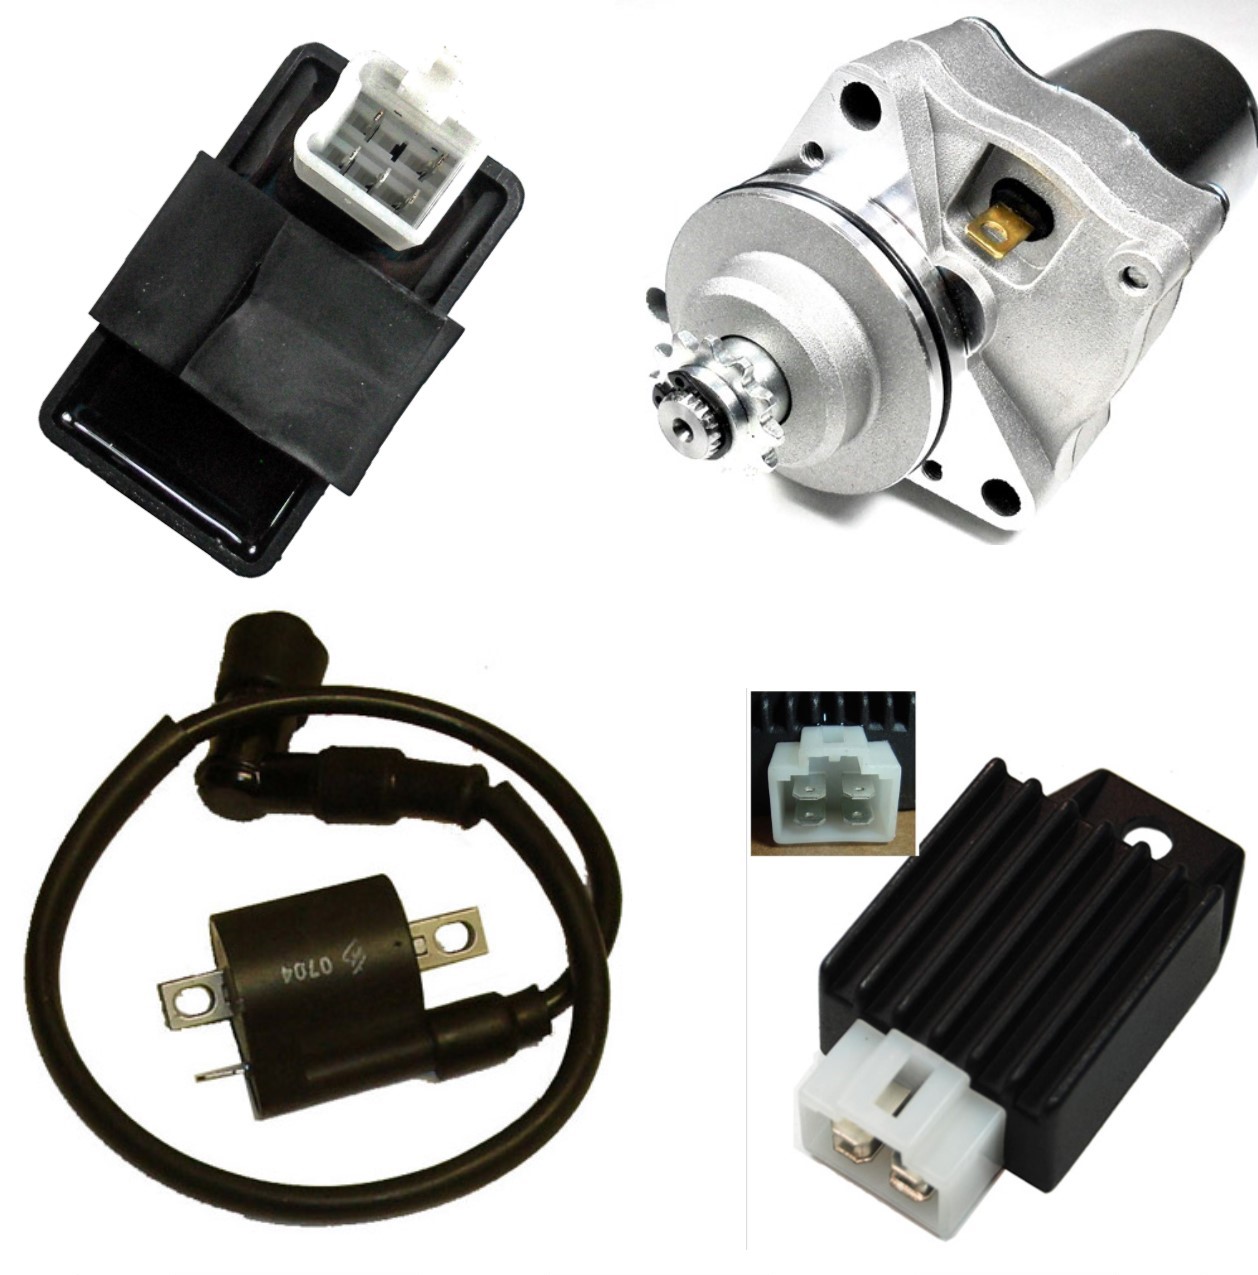 Electrical Parts Starters-CDI-Coils-Relays-Stators 100cc ATV-Dirtbikes